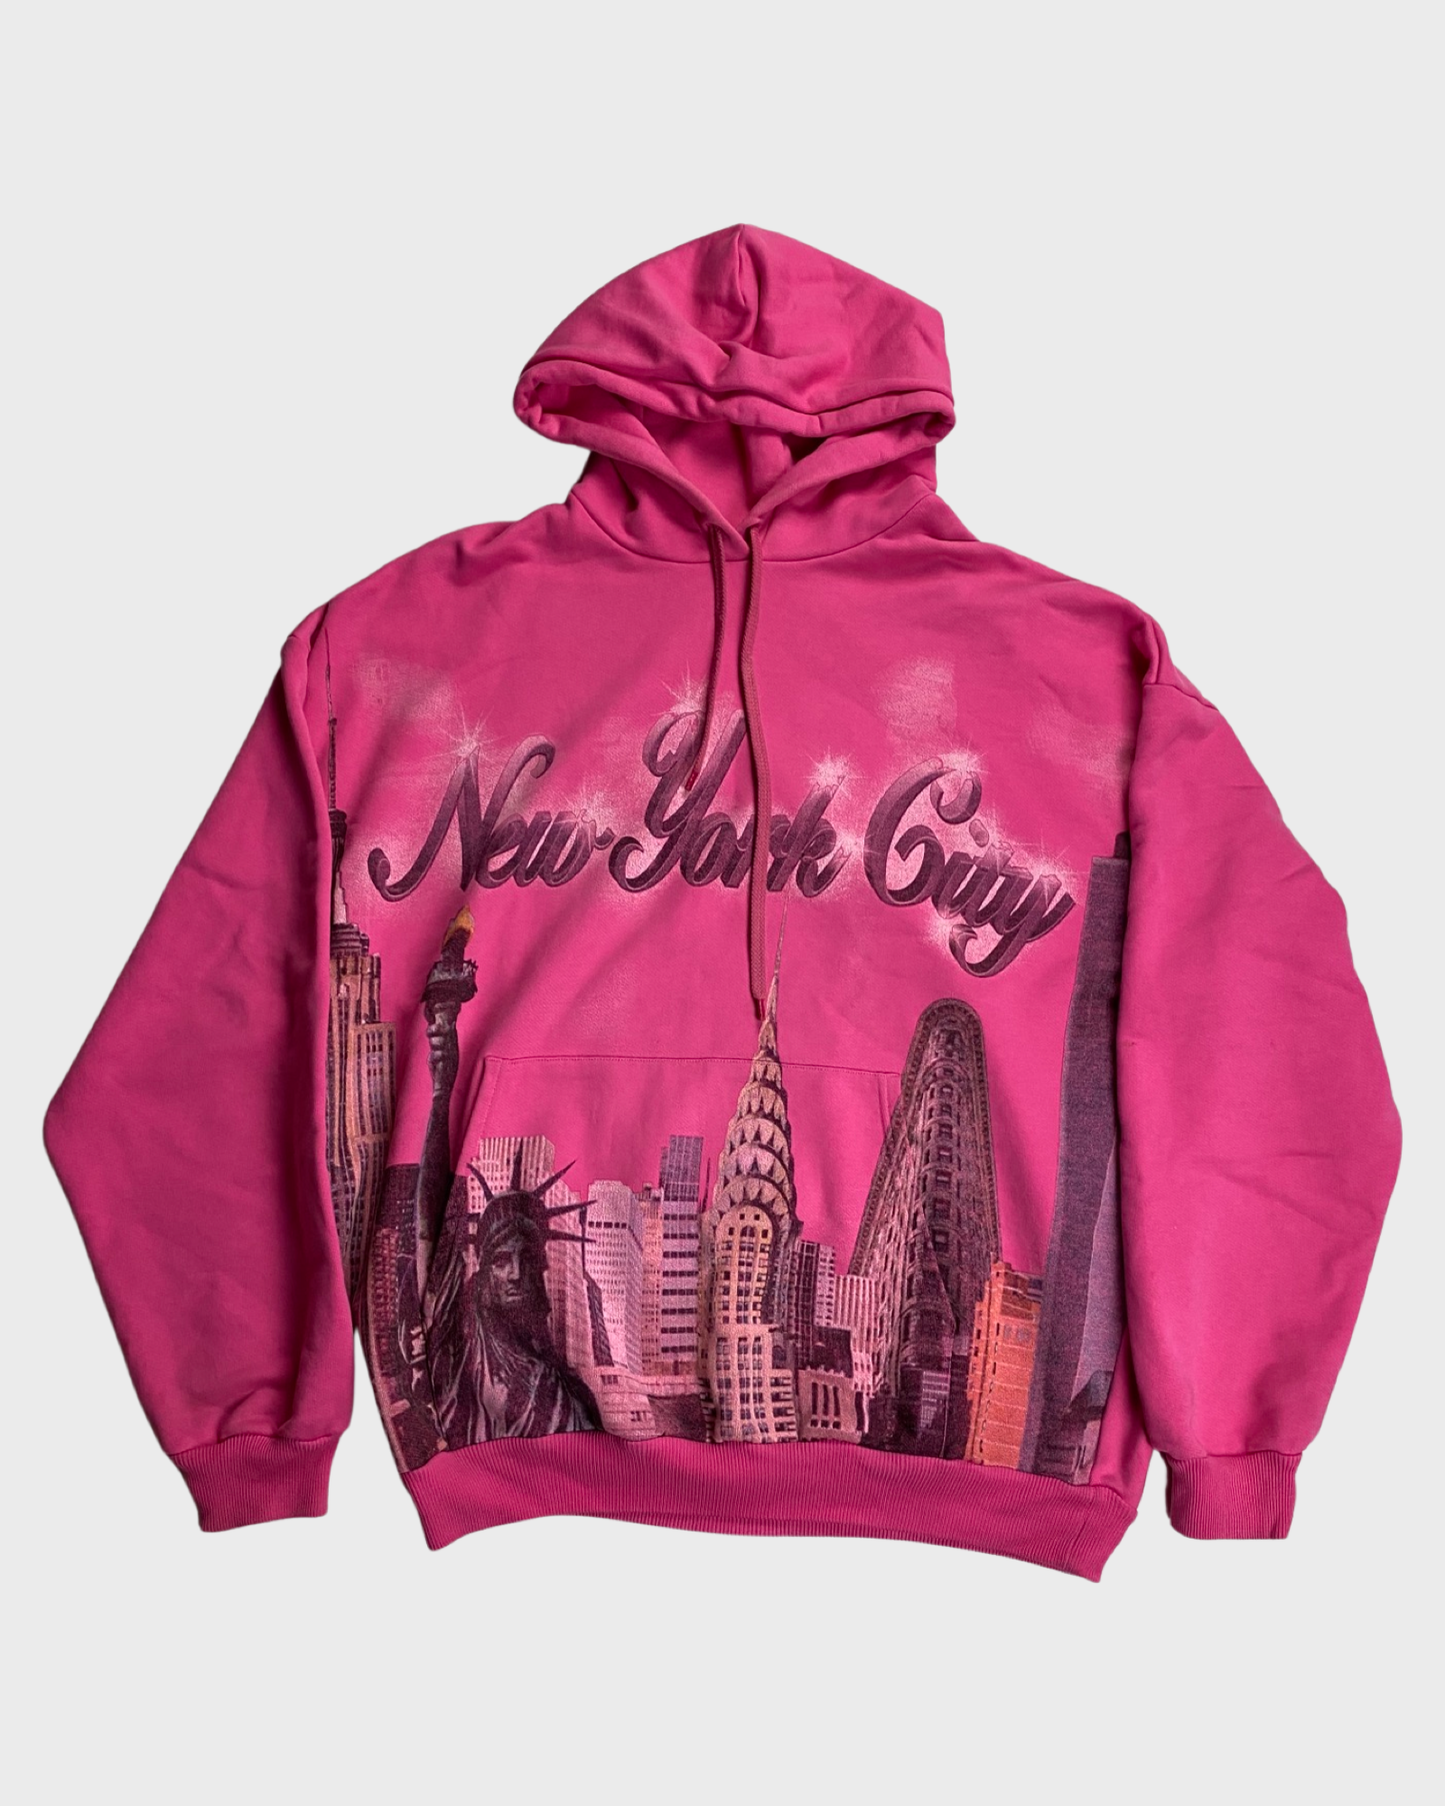 syre Gennemsigtig Medicin Balenciaga NYC pink airbrushed oversized hoodie SZ:XS|S|M – Bankofgrails